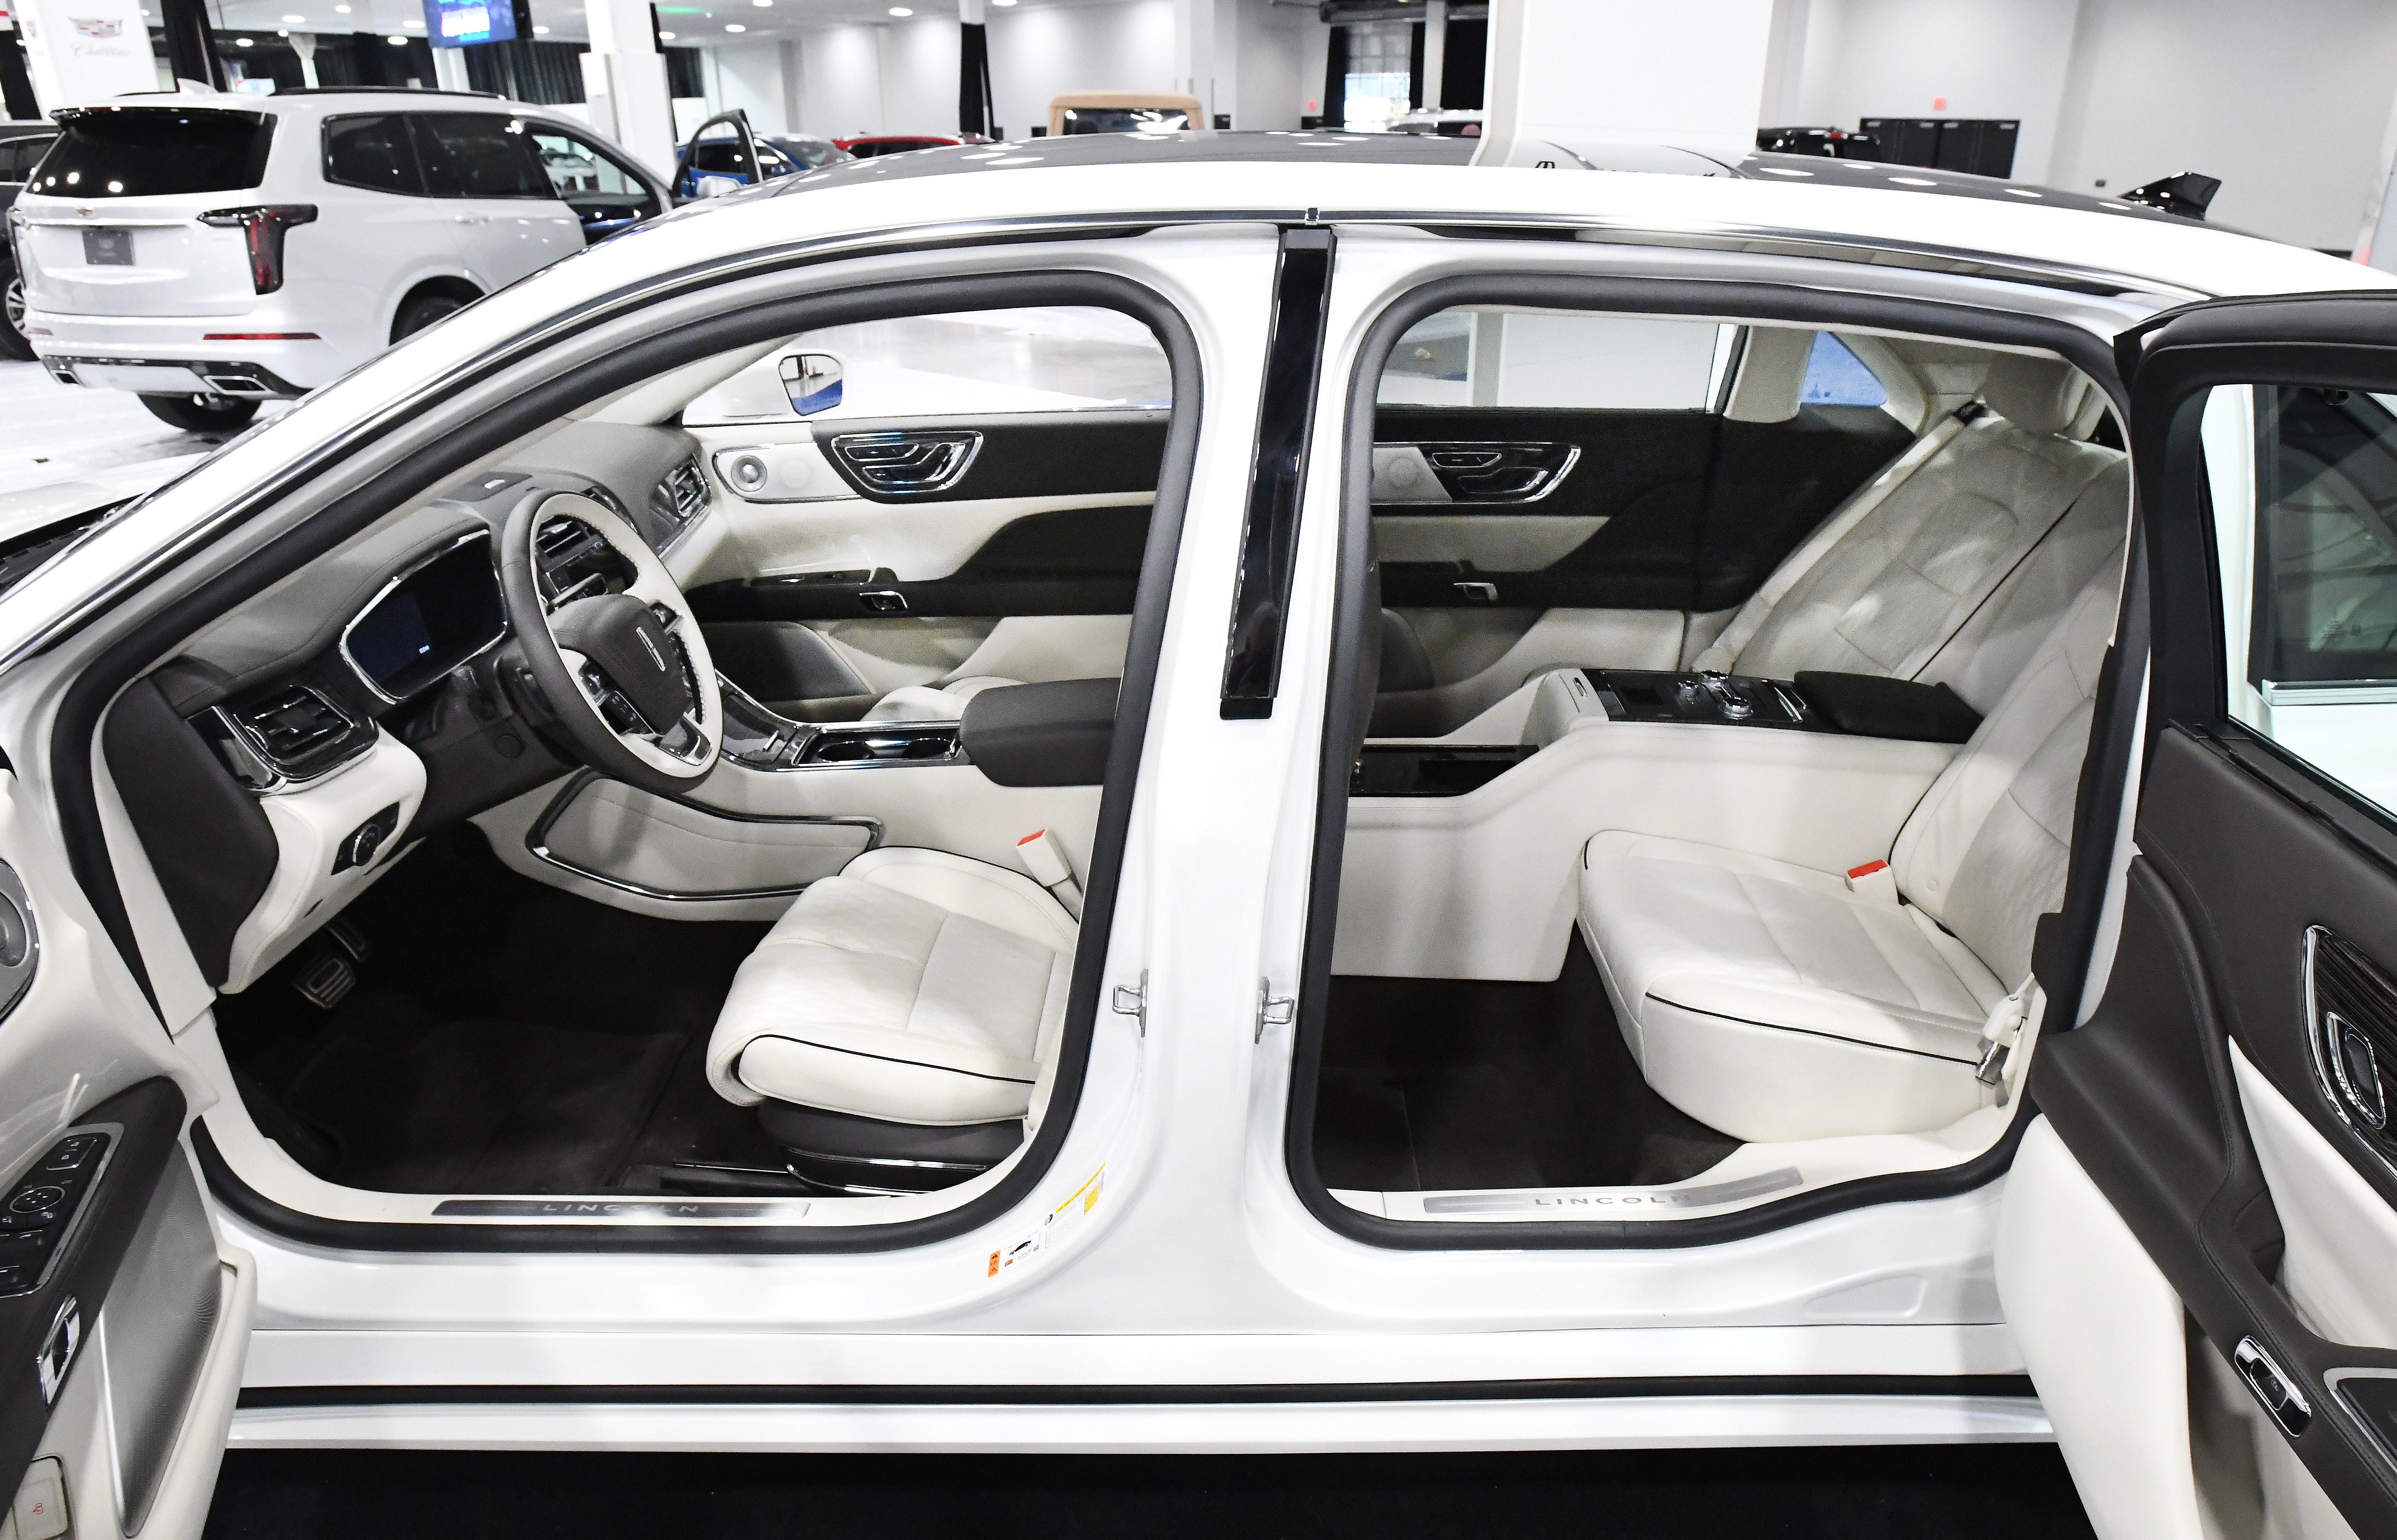 The 2020 Lincoln Continental with a 6 inch extended body for a longer vehicle and rear suicide doors is on display during final preparations for the first annual Southeast Michigan Auto Show at Suburban Collection Showcase in Novi, Michigan on January 2, 2020.